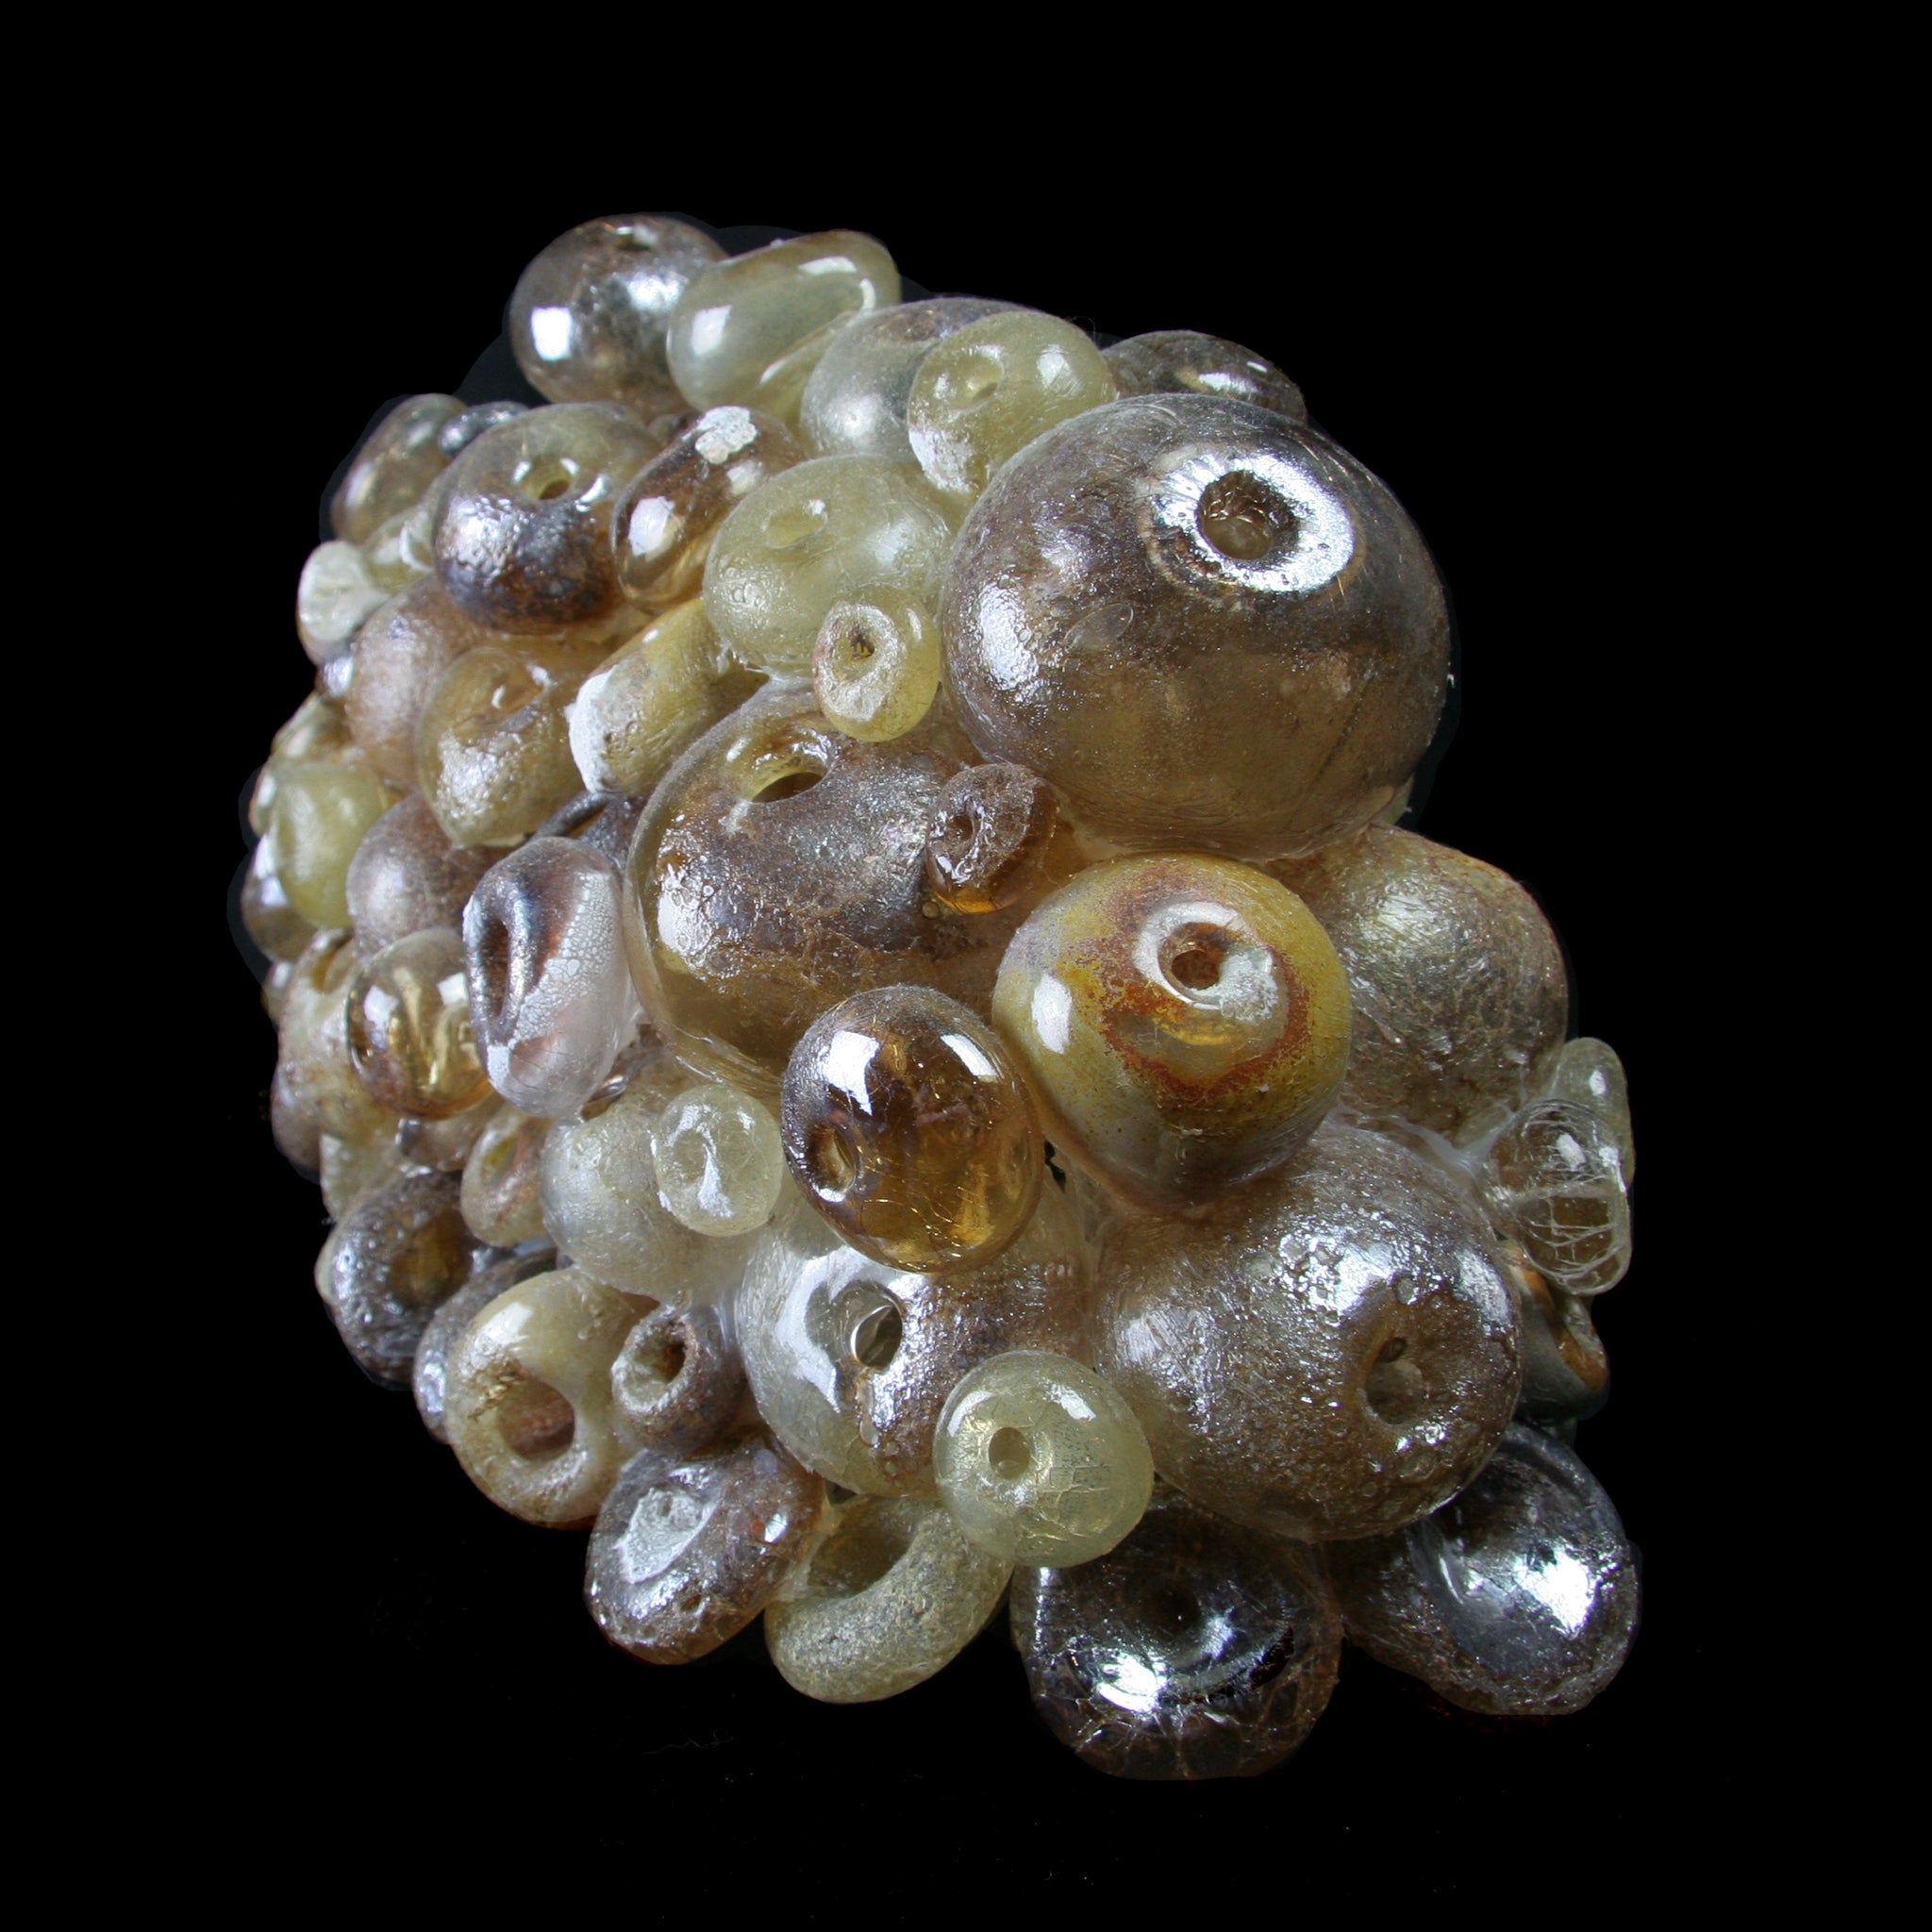 Side view of Large Brown Barnacle glass sculpture